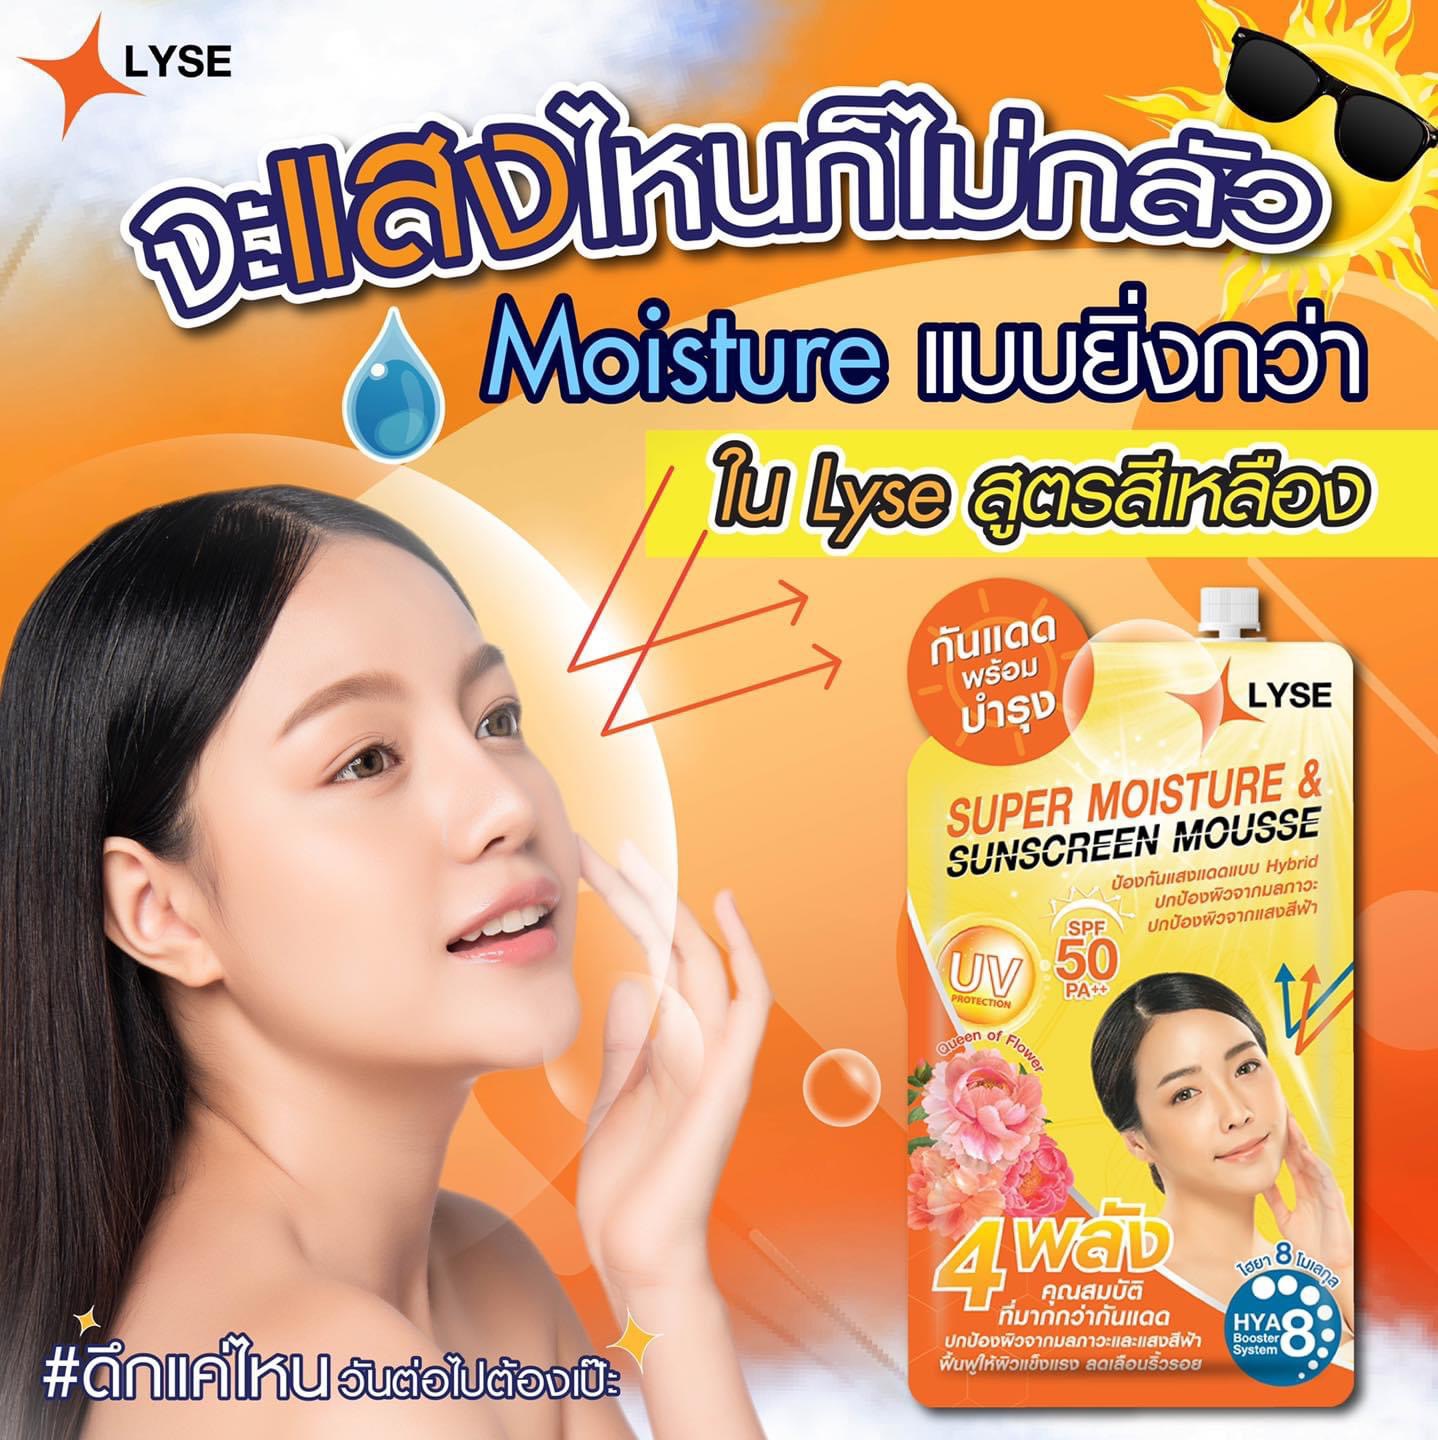 SIRA Mousse Texture Sunscreen, Gallery posted by สุดาพาเปย์